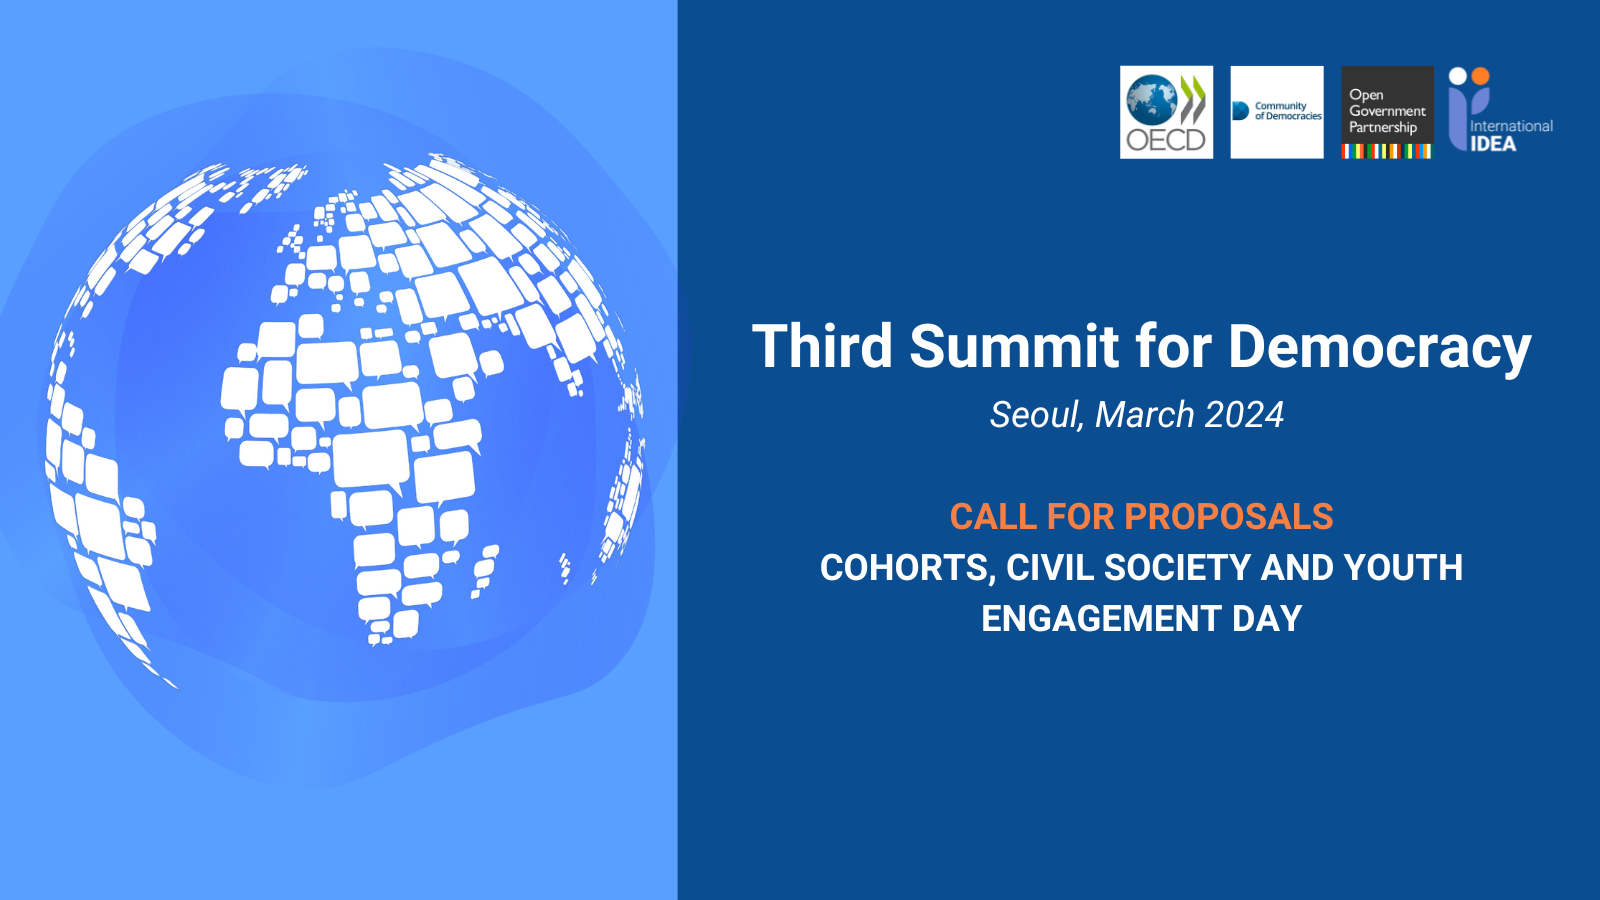 A Call for Proposals is now open for events at the third Summit for Democracy in March 2024 in Seoul, the Republic of Korea.